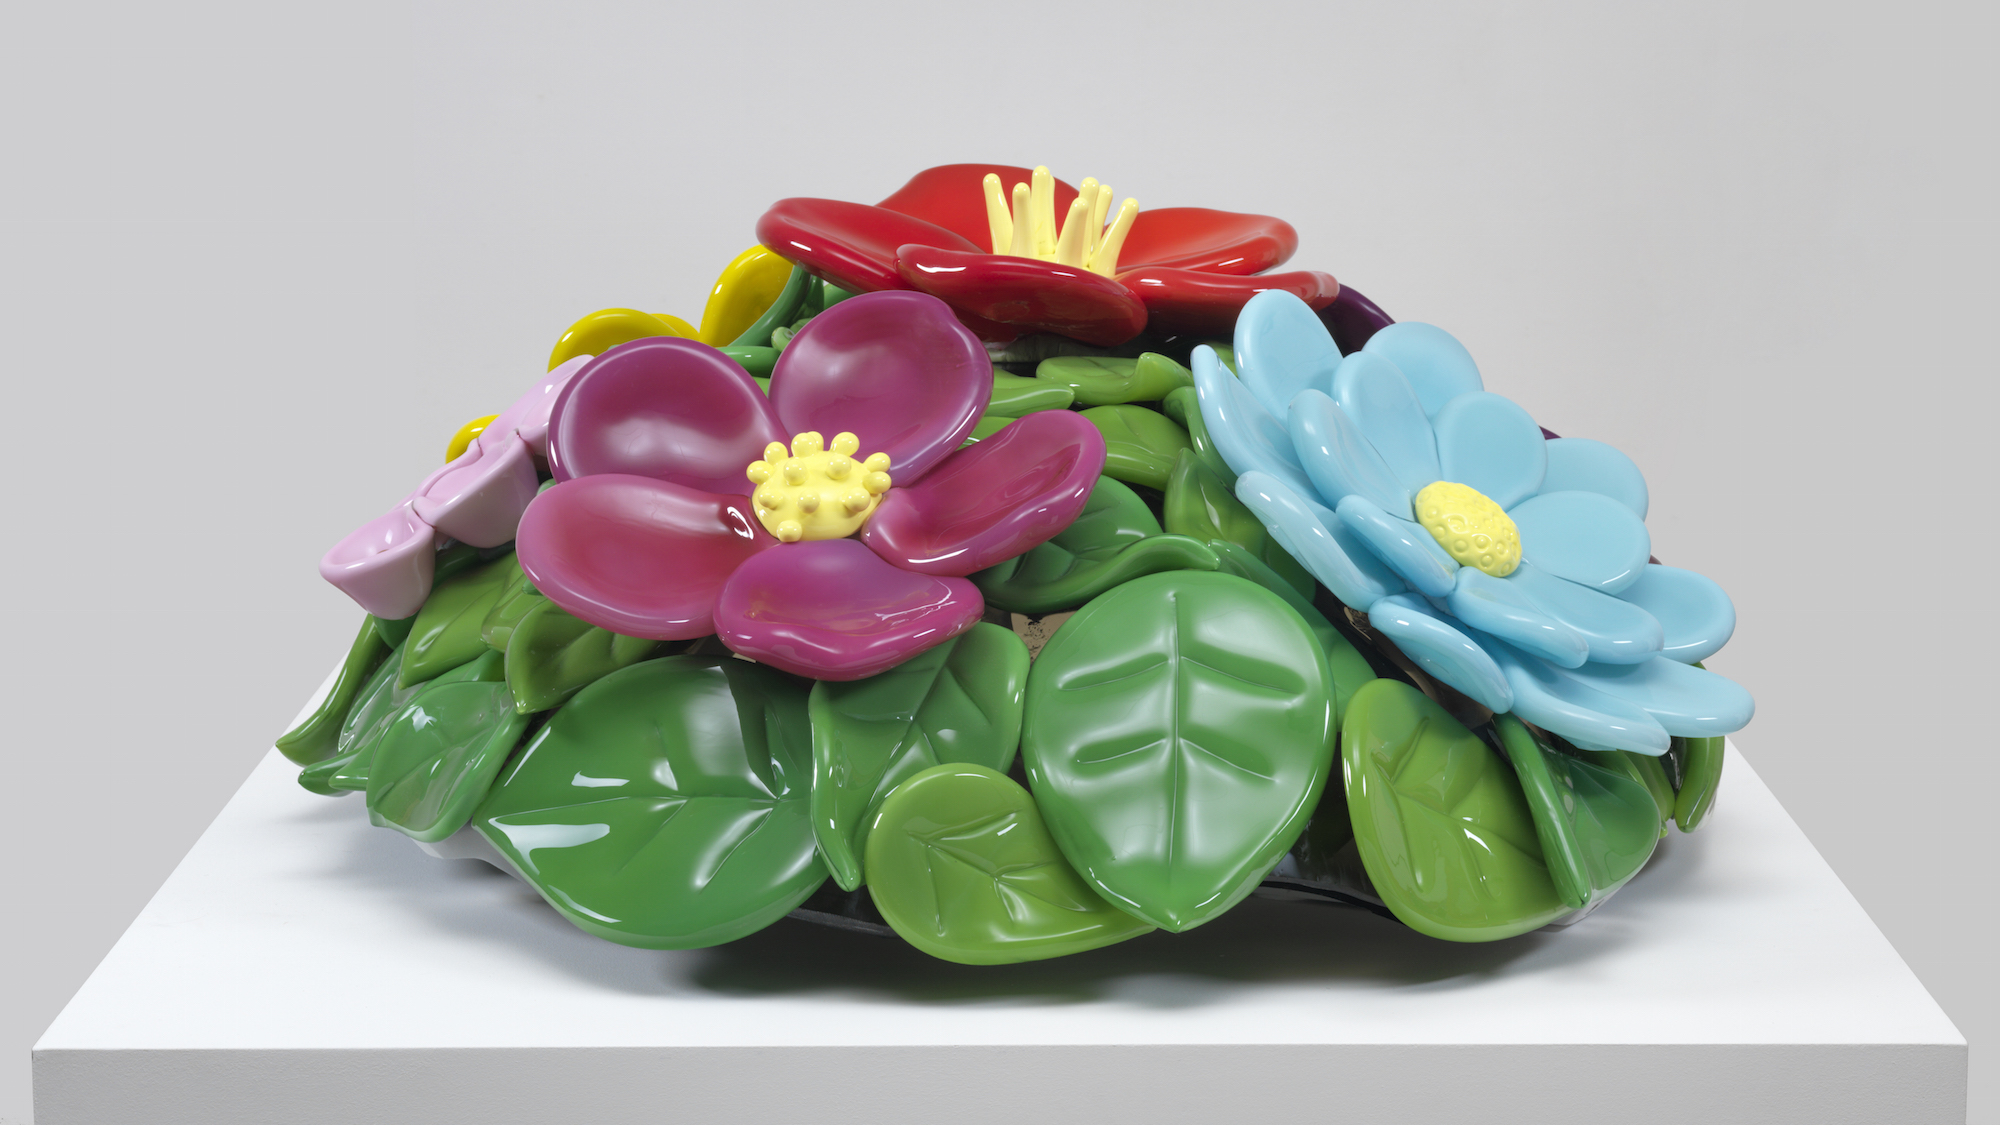 Jeff Koons, Mound of Flowers, 1991, Artist Rooms, Tate and National Galleries of Scotland. Acquired jointly through The d'Offay Donation with assistance from the National Heritage Memorial Fund and the Art Fund 2008, © Jeff Koons. Image courtesy Norwich Castle Museum and Art Gallery.